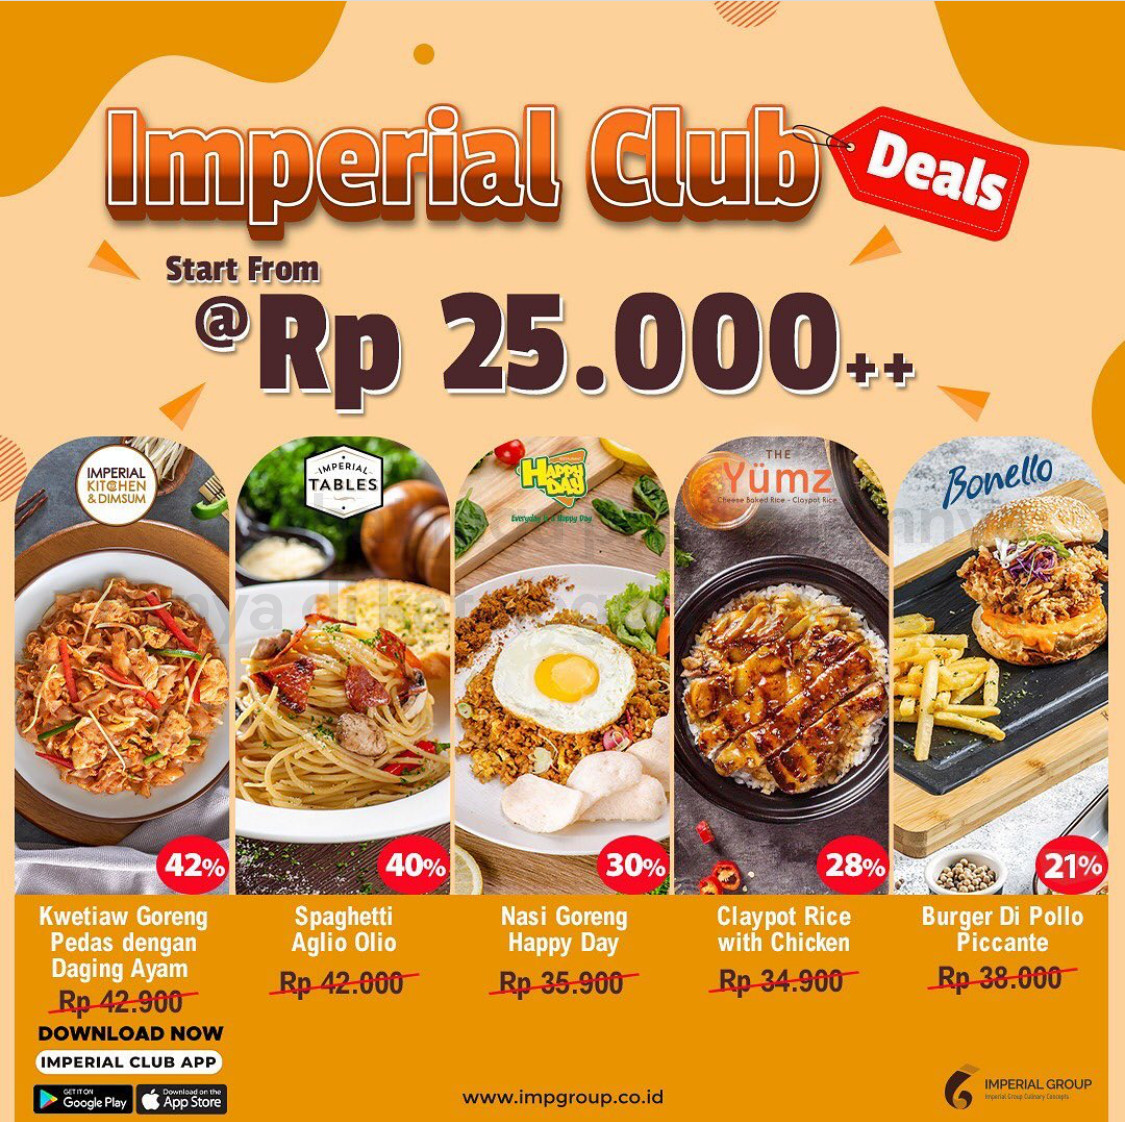 IMPERIAL TABLES Promo IMPERIAL CLUB DEALS - Harga Spesial Voucher Lamongan’s Soto hanya Rp 25.000++